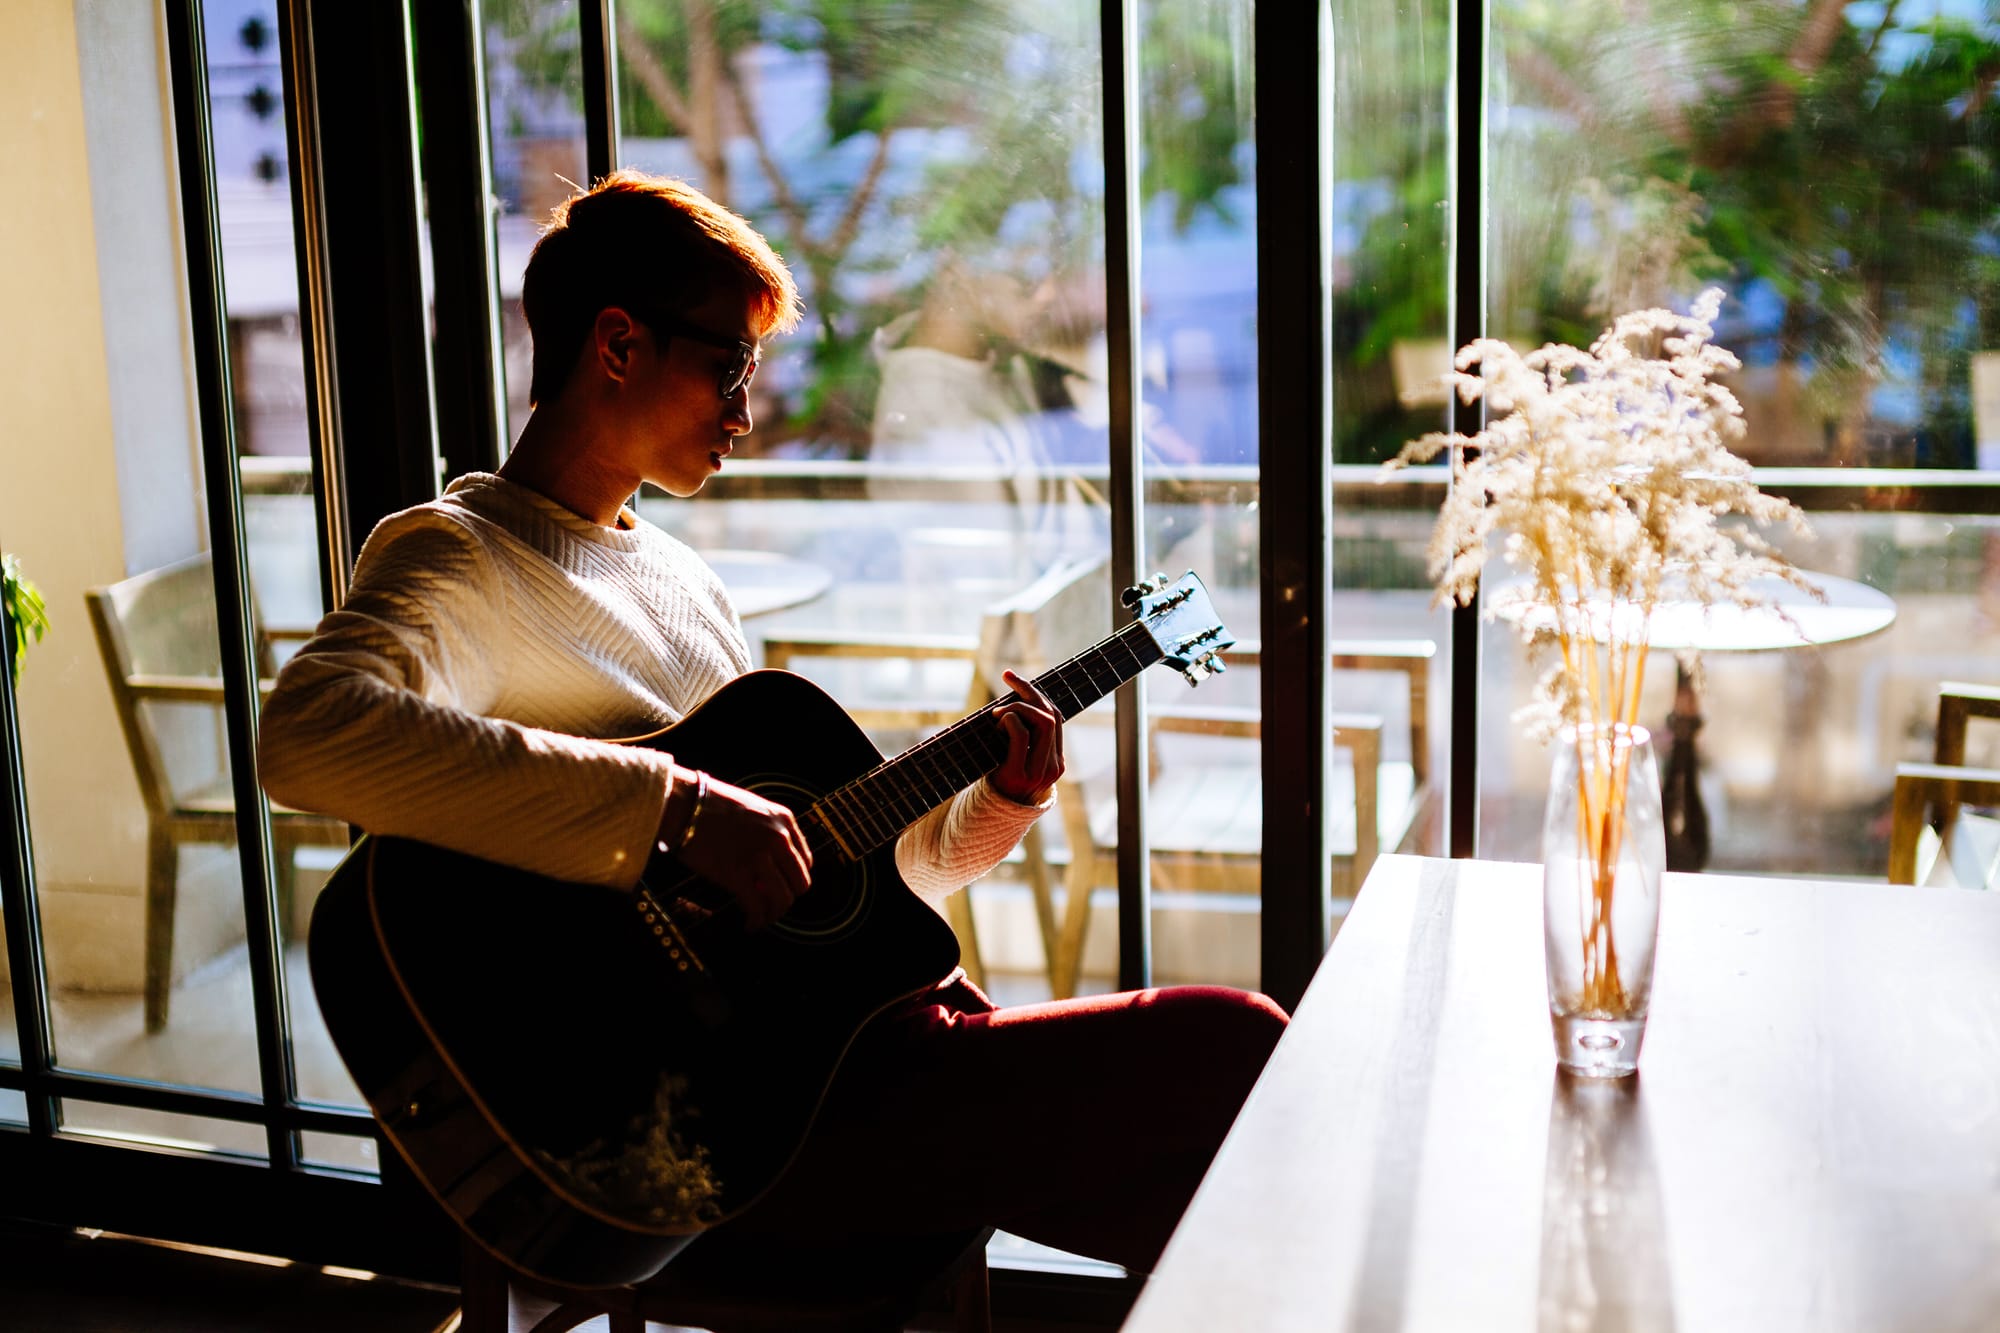 Guitar player in coffee shop bistro cafe next to a seating arrangement.